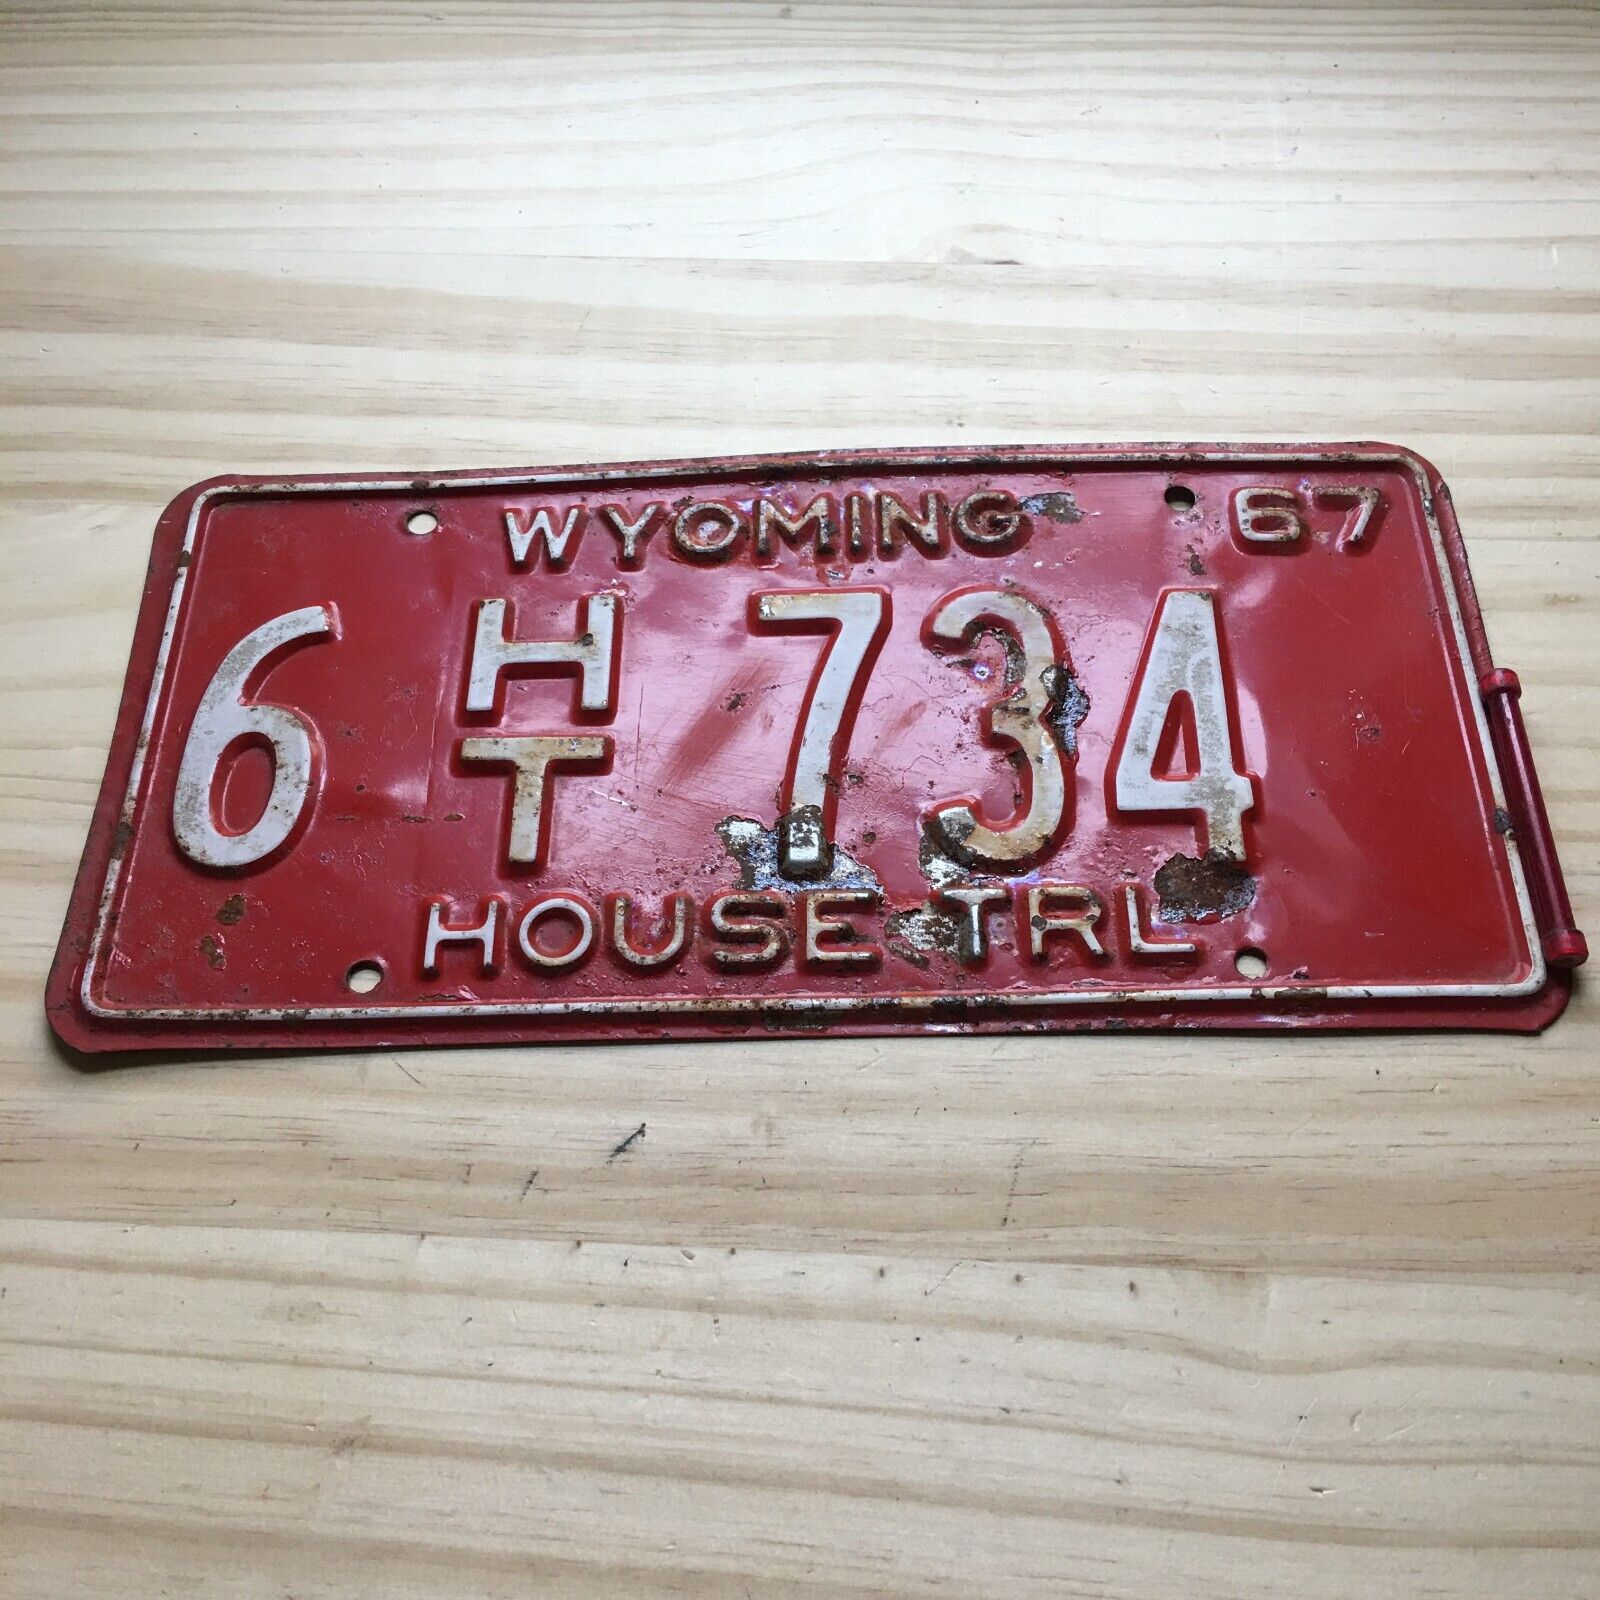 Vintage RED Wyoming House TRL Trailer License Plate  1967 6 HT-734